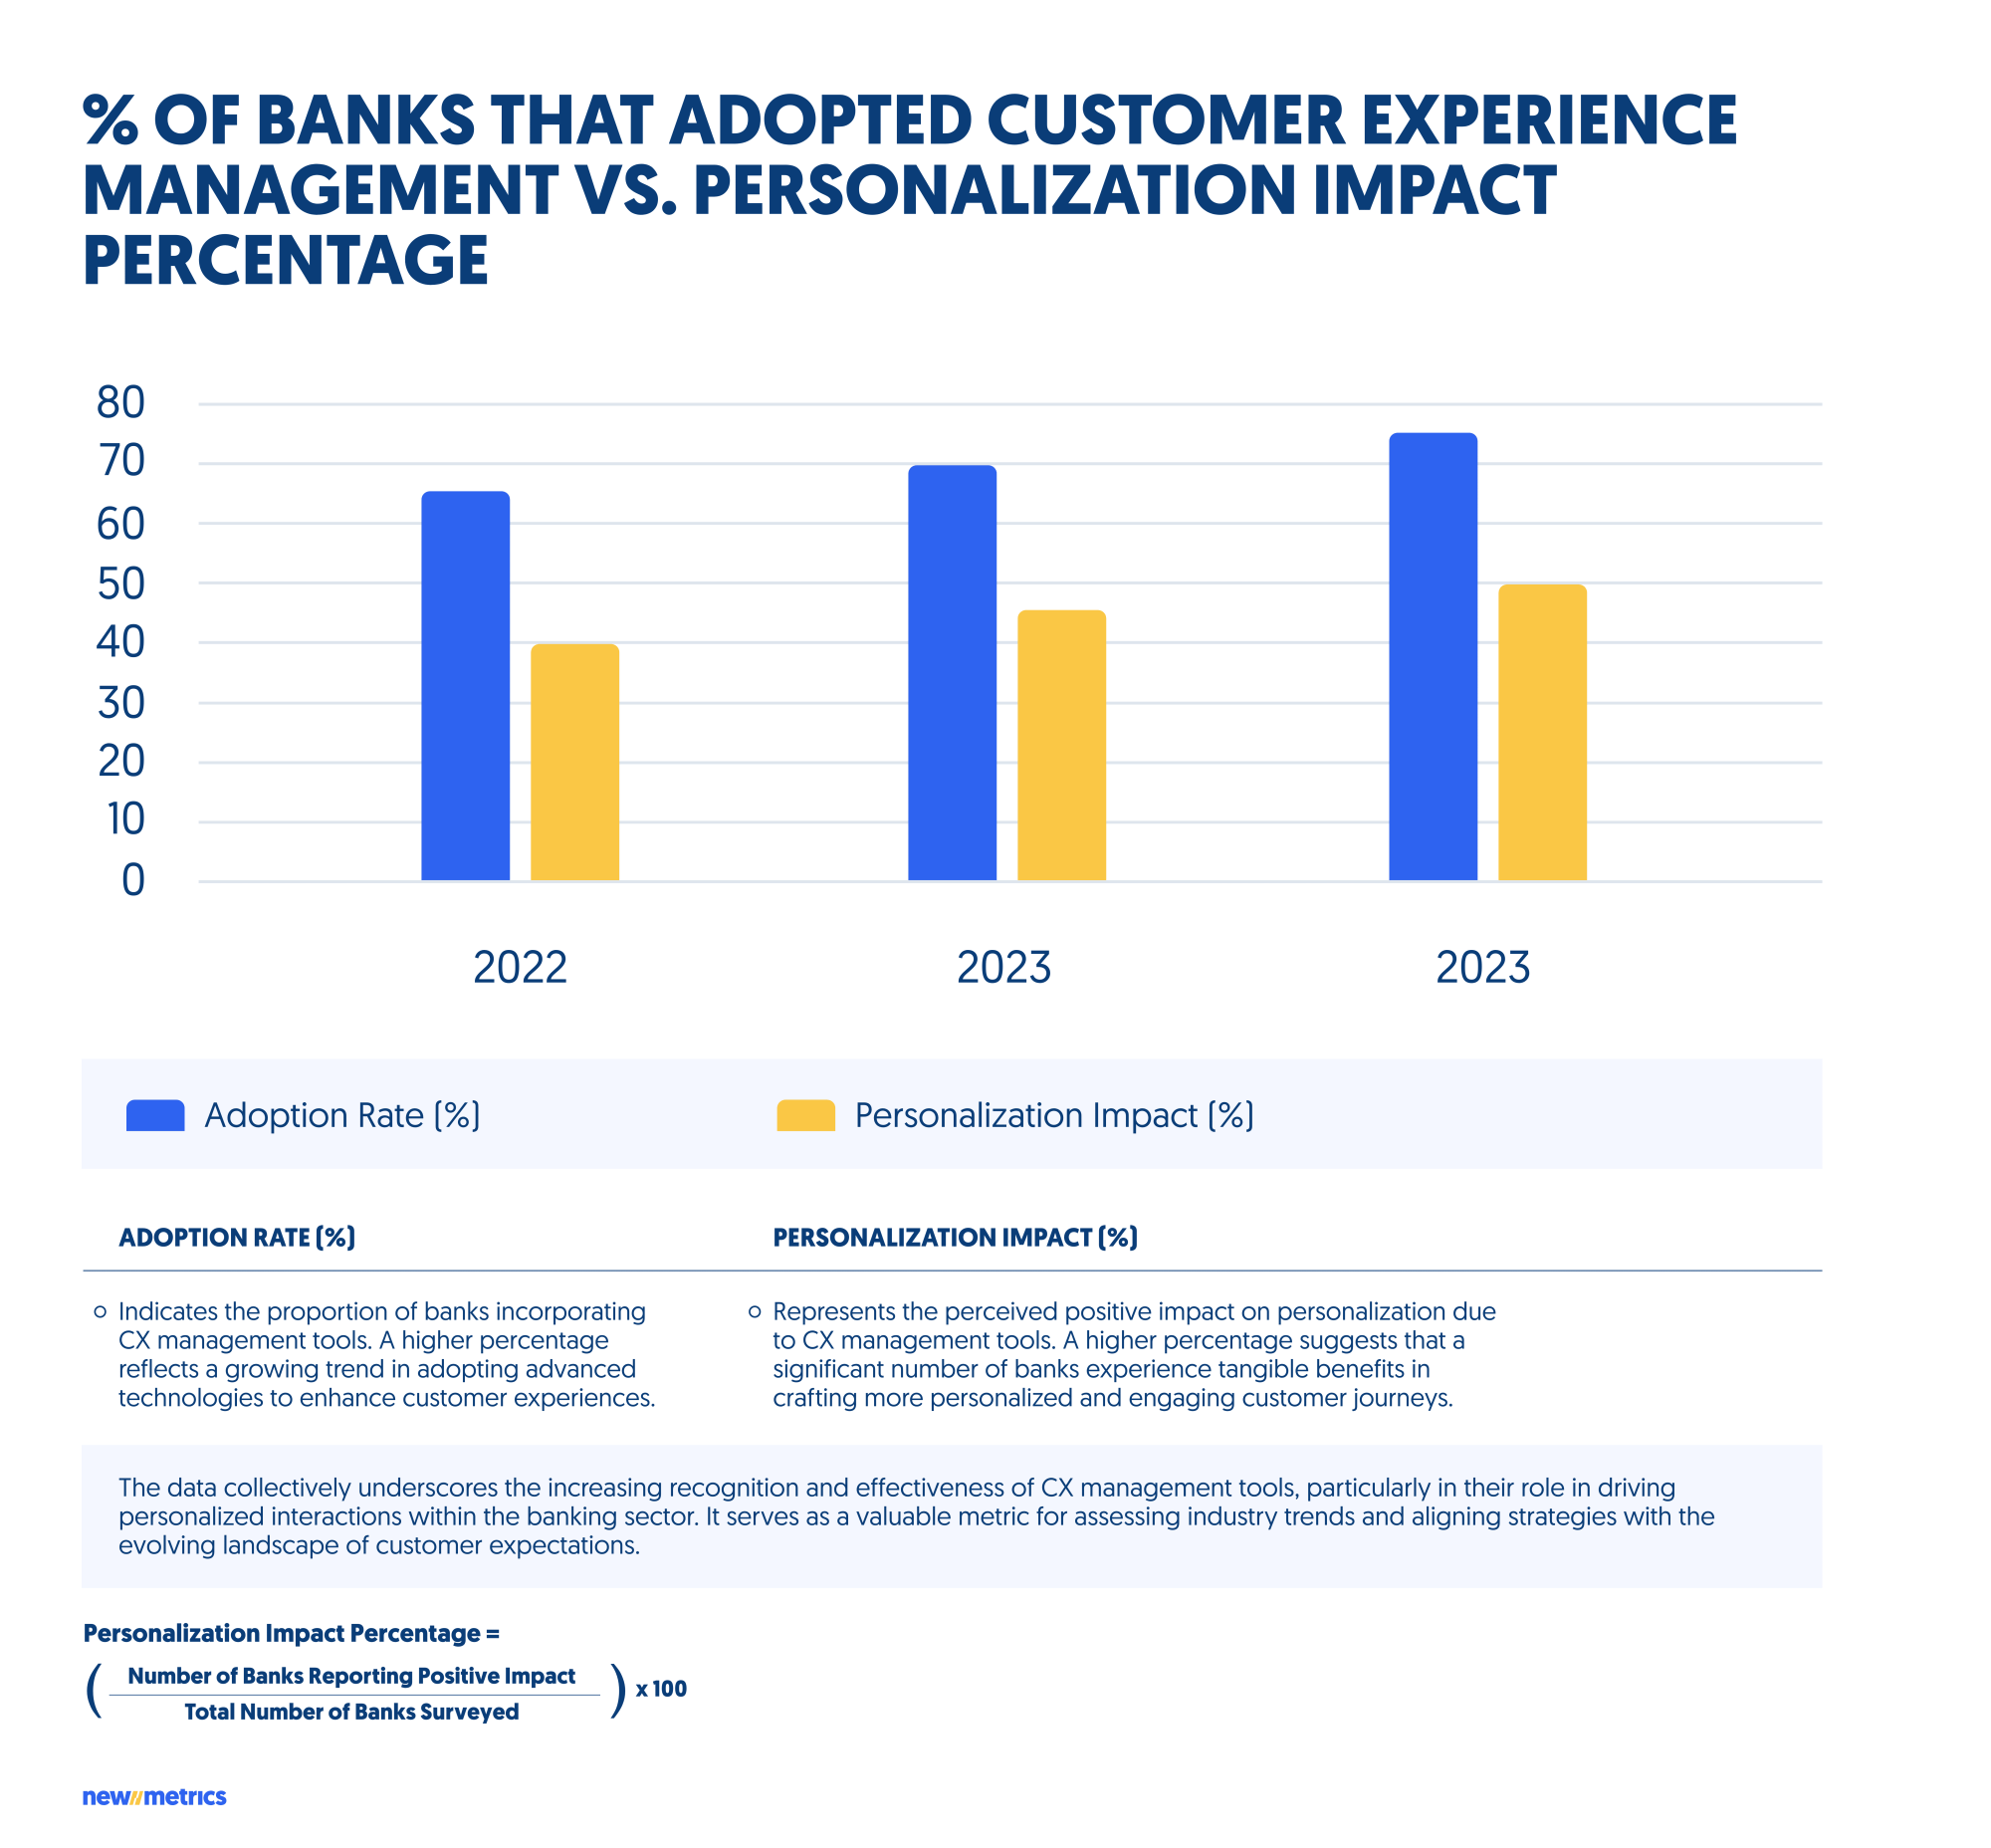 customer experience management in banks and personalization, technology trends 2024